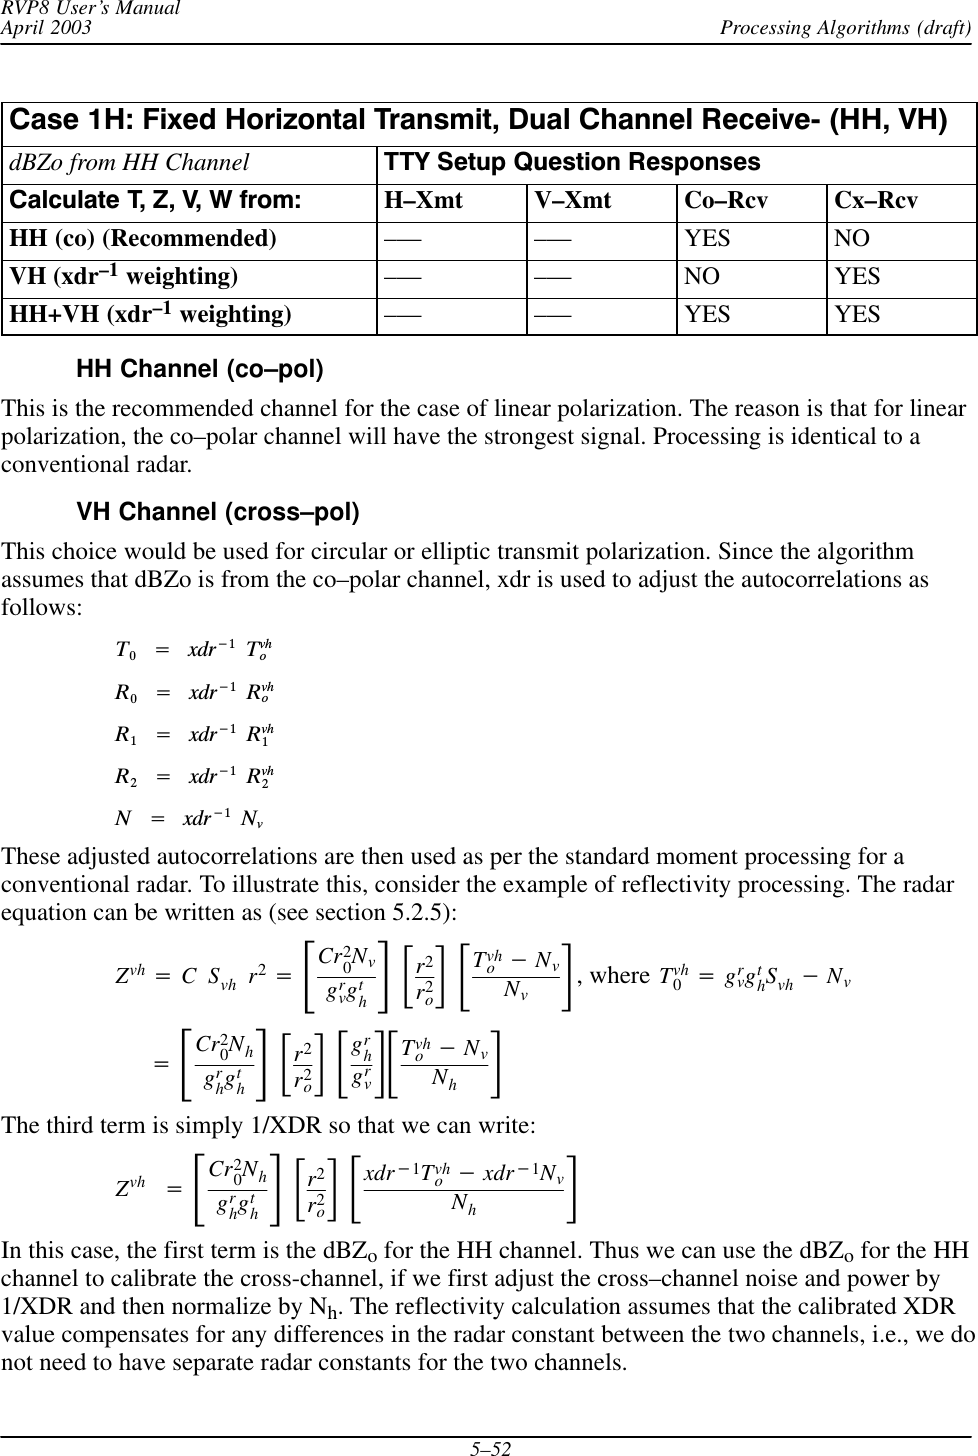 Processing Algorithms (draft)RVP8 User’s ManualApril 20035–52Case 1H: Fixed Horizontal Transmit, Dual Channel ReceiveĆ (HH, VH)dBZo from HH Channel TTY Setup Question ResponsesCalculate T, Z, V, W from: H–Xmt V–Xmt Co–Rcv Cx–RcvHH (co) (Recommended) ––– ––– YES NOVH (xdr–1 weighting) ––– ––– NO YESHH+VH (xdr–1 weighting) ––– ––– YES YESHH Channel (co–pol)This is the recommended channel for the case of linear polarization. The reason is that for linearpolarization, the co–polar channel will have the strongest signal. Processing is identical to aconventional radar.VH Channel (cross–pol)This choice would be used for circular or elliptic transmit polarization. Since the algorithmassumes that dBZo is from the co–polar channel, xdr is used to adjust the autocorrelations asfollows:T0Ą+Ąxdr*1ĄTvhoR0Ą+Ąxdr*1ĄRvhoR1Ą+Ąxdr*1ĄRvh1R2Ą+Ąxdr*1ĄRvh2NĄ+Ąxdr*1ĄNvThese adjusted autocorrelations are then used as per the standard moment processing for aconventional radar. To illustrate this, consider the example of reflectivity processing. The radarequation can be written as (see section 5.2.5):Zvh +CSvh r2+ƪCr20Nvgrvgthƫƪr2r2oƫƪTvho*NvNvƫ, where Tvh0+grvgthSvh *Nv+ƪCr20Nhgrhgthƫƪr2r2oƫƪgrhgrvƫƪTvho*NvNhƫThe third term is simply 1/XDR so that we can write:Zvh +ƪCr20Nhgrhgthƫƪr2r2oƫƪxdr*1Tvho*xdr*1NvNhƫIn this case, the first term is the dBZo for the HH channel. Thus we can use the dBZo for the HHchannel to calibrate the cross-channel, if we first adjust the cross–channel noise and power by1/XDR and then normalize by Nh. The reflectivity calculation assumes that the calibrated XDRvalue compensates for any differences in the radar constant between the two channels, i.e., we donot need to have separate radar constants for the two channels.